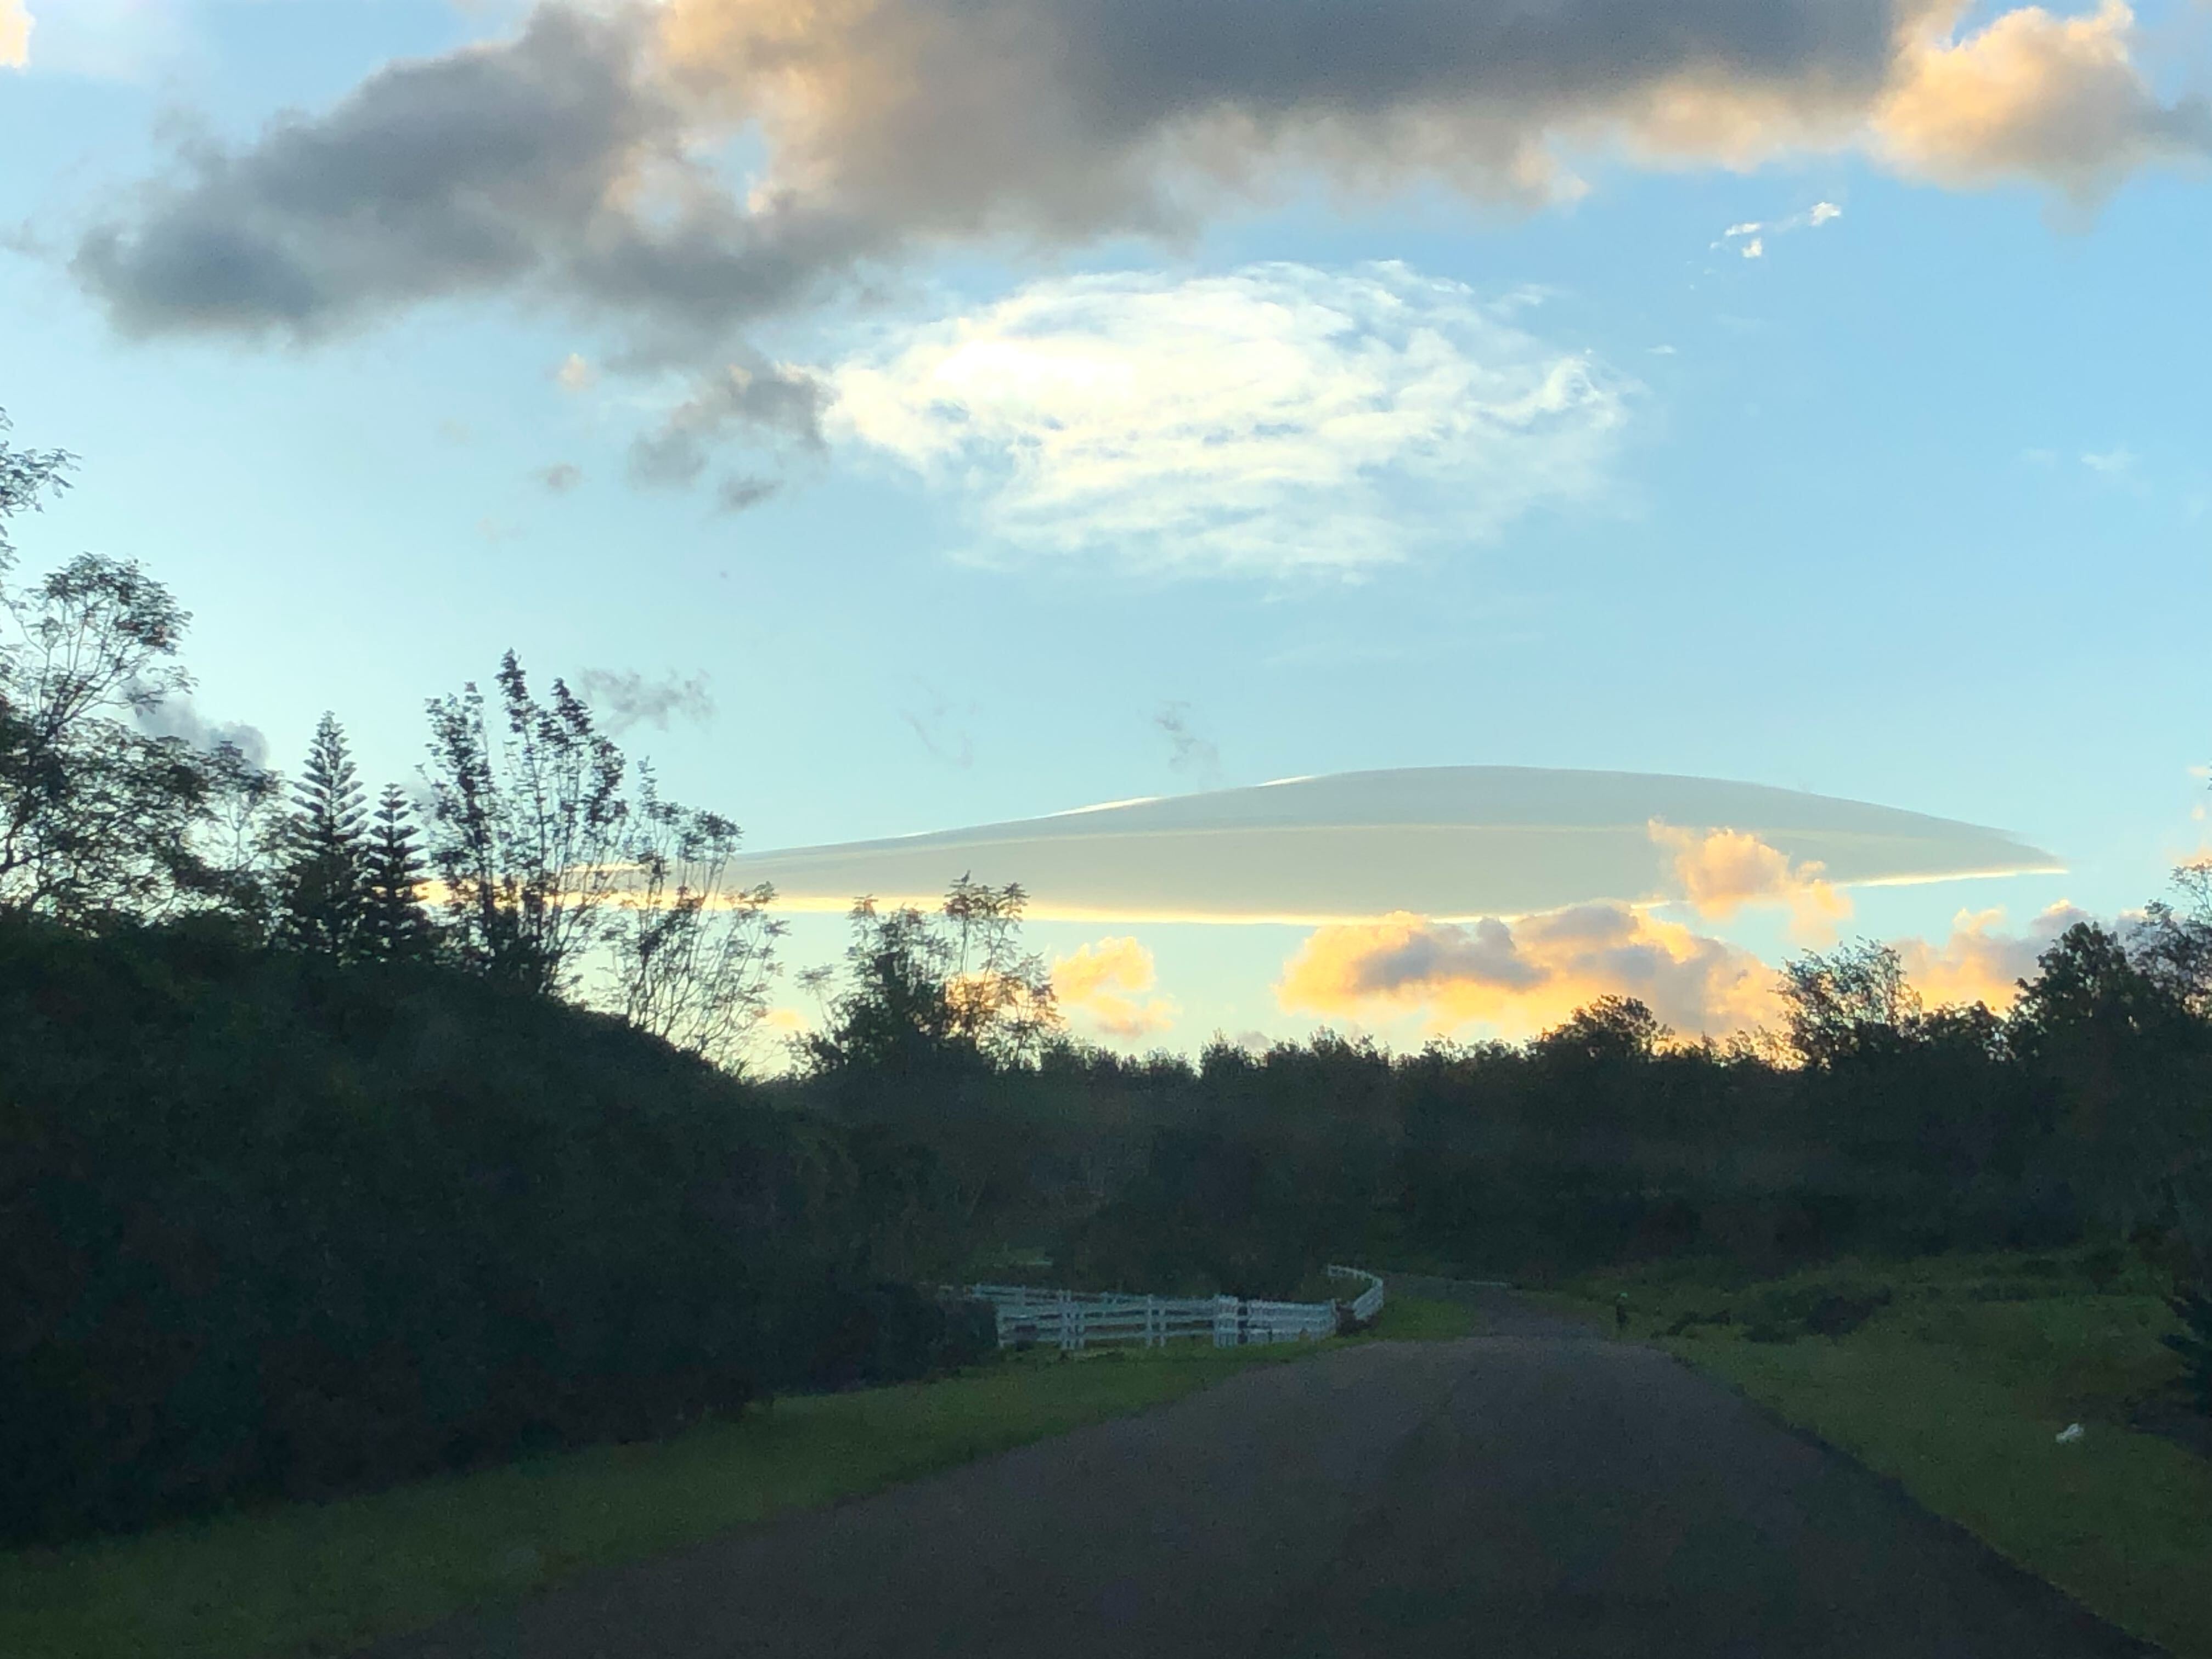 a large saucer-shaped cloud above a wooded road